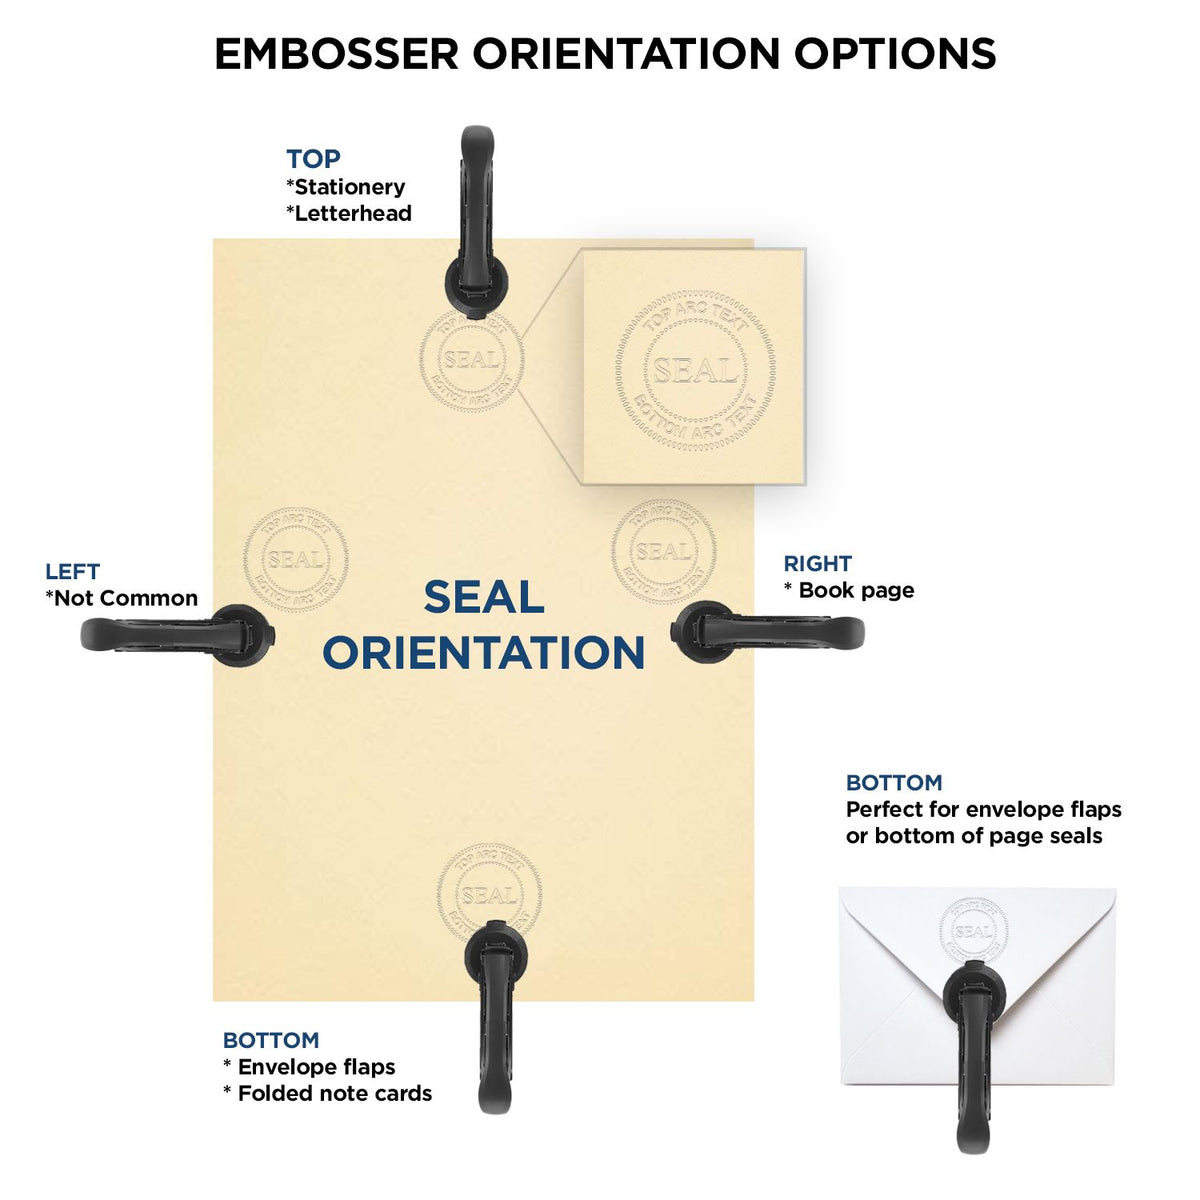 An infographic for the Hybrid Texas Architect Seal showing embosser orientation, this is showing examples of a top, bottom, right and left insert.